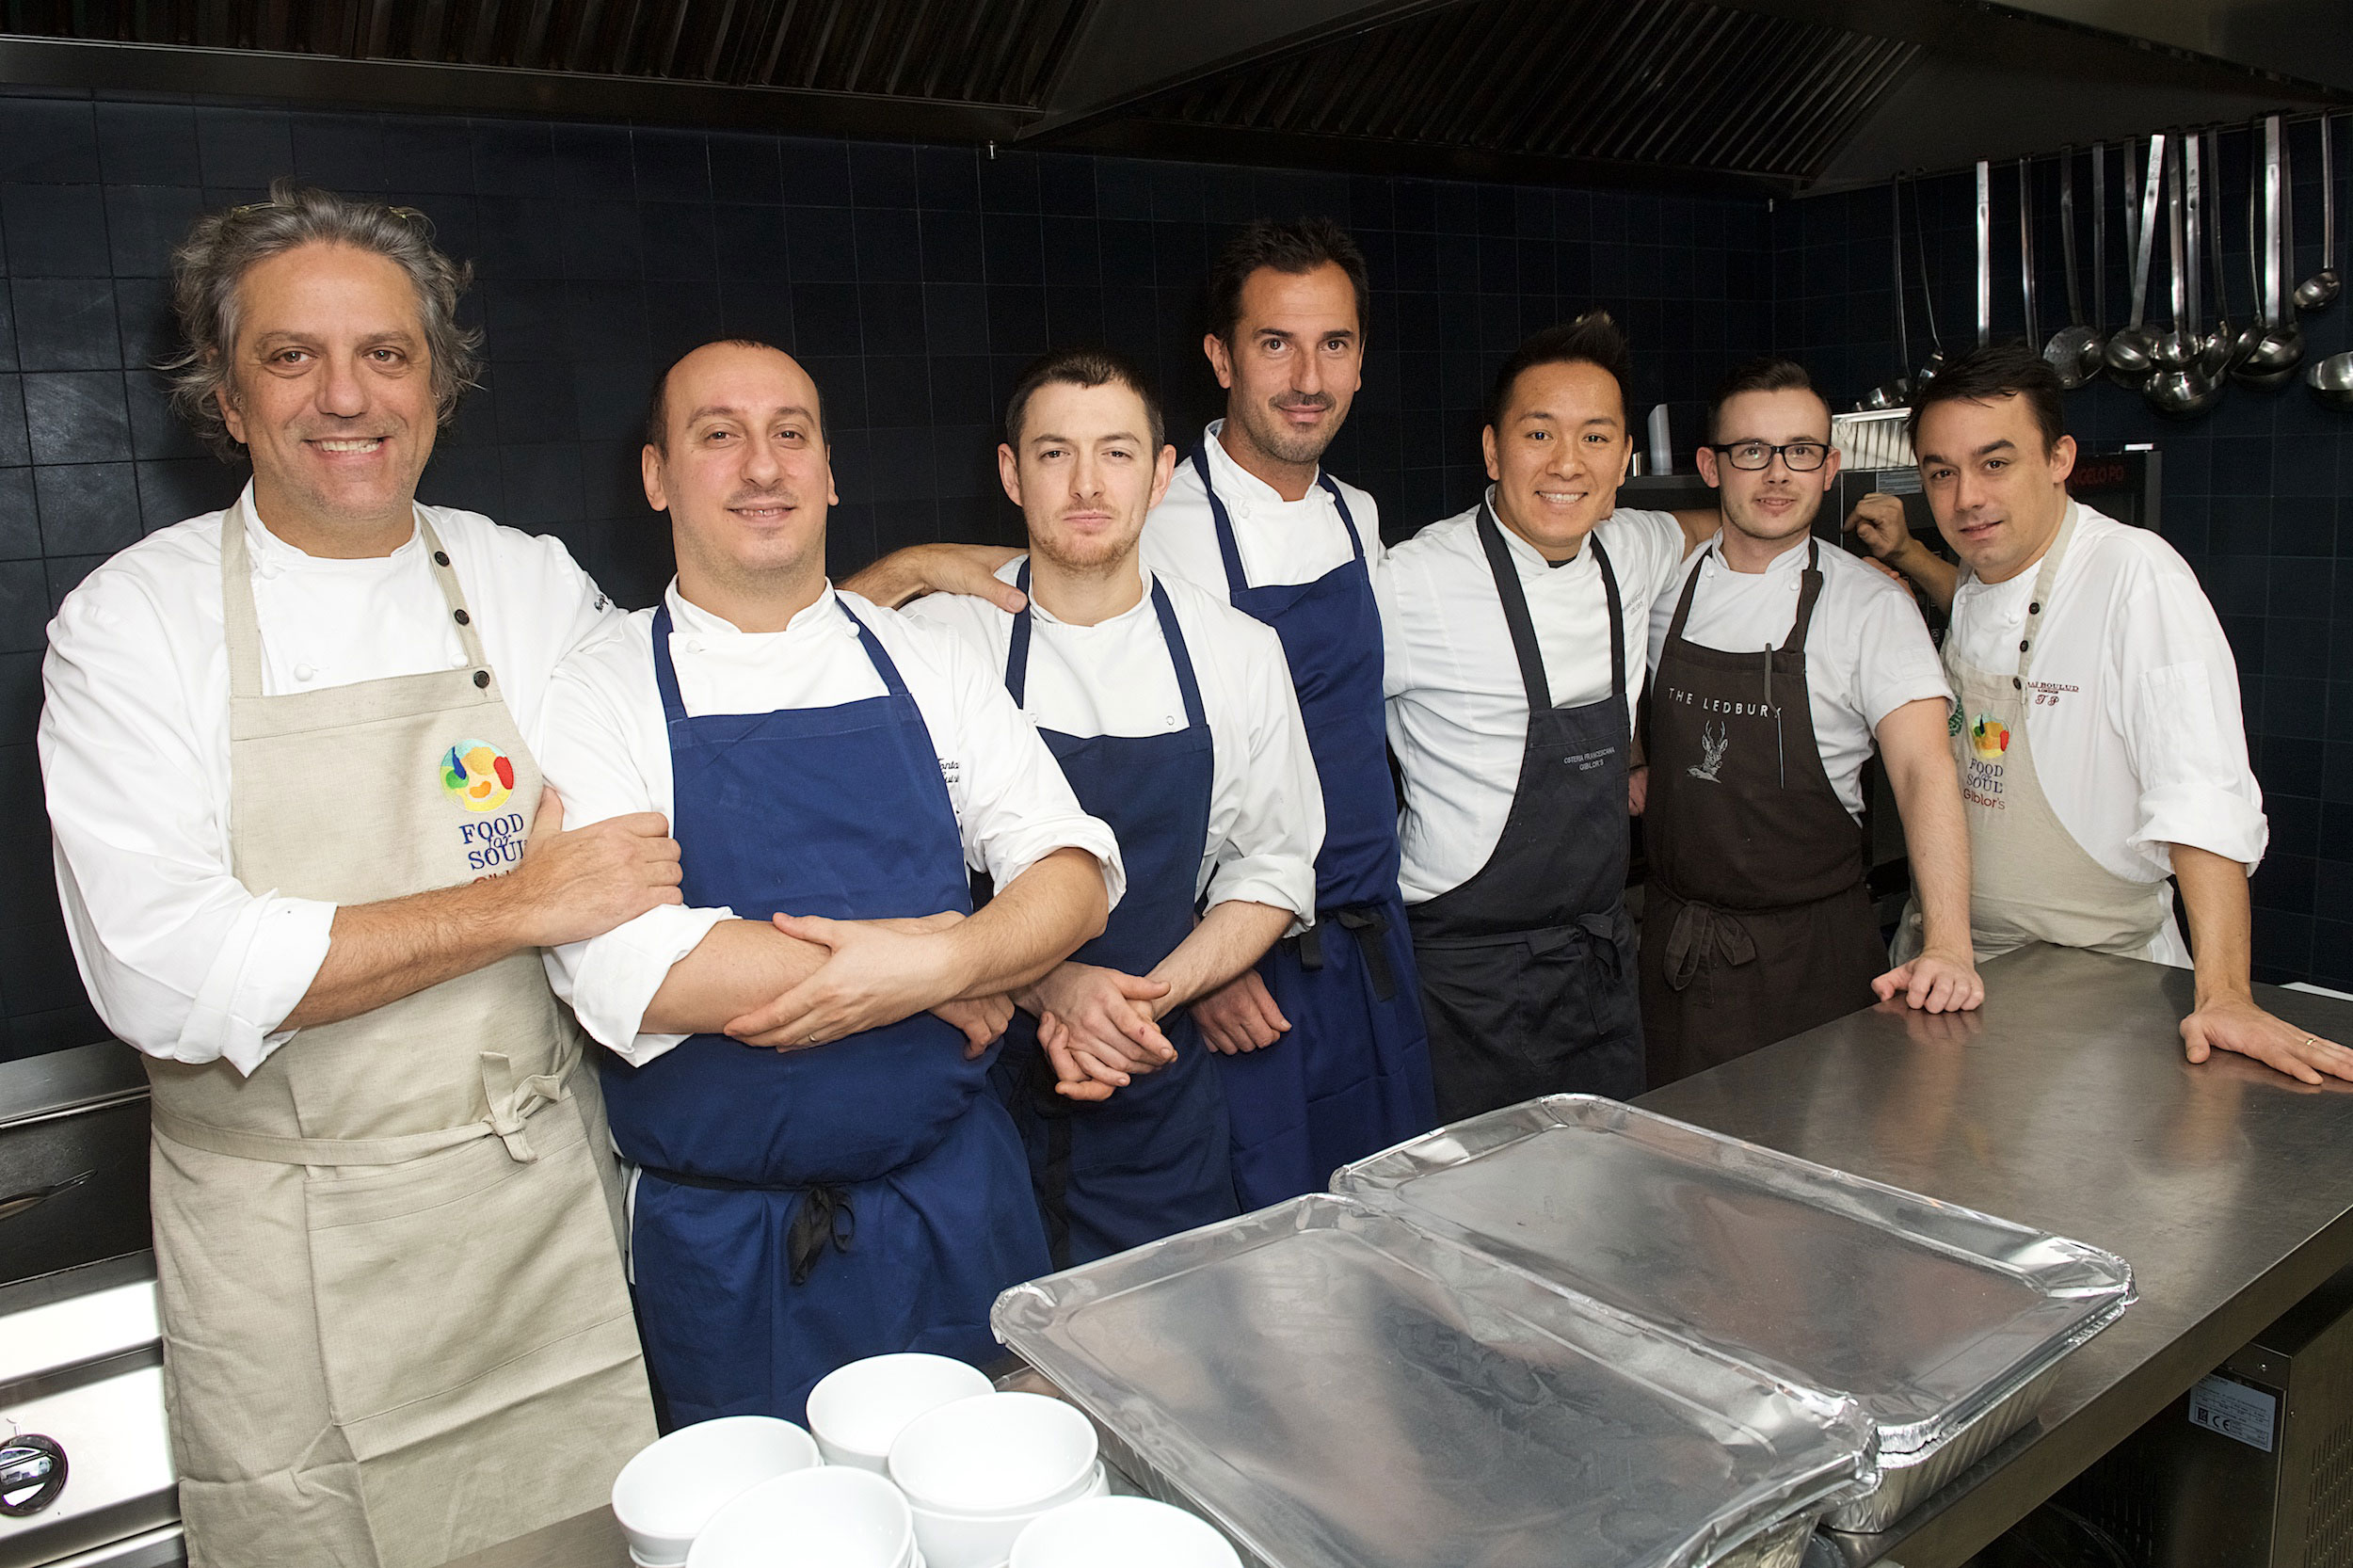 The team who created the food